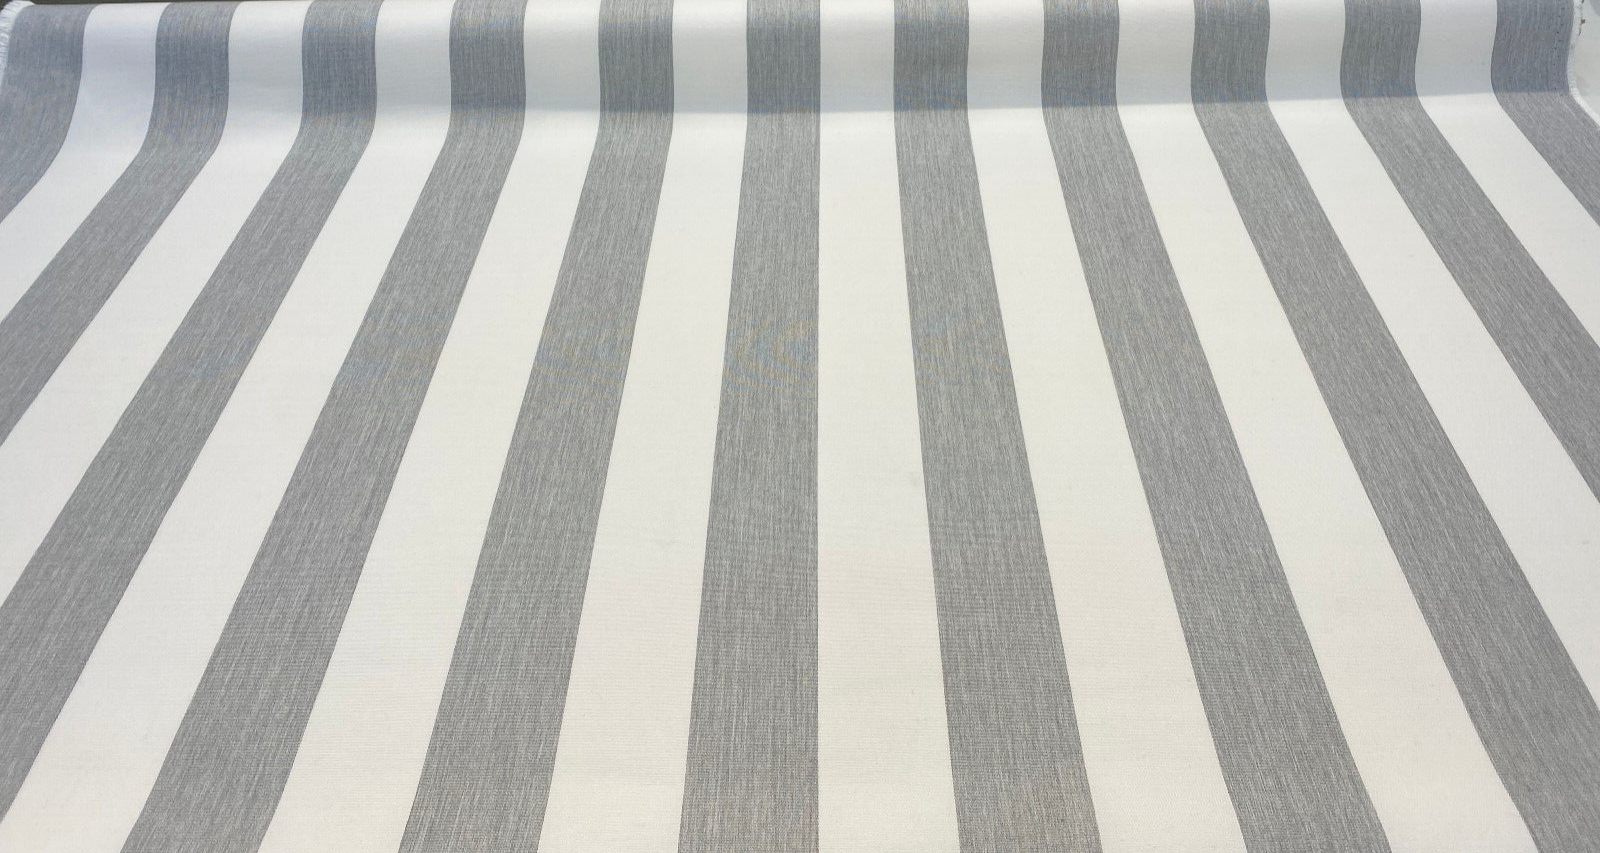 Sunbrella Cove Pebble Stripes Outdoor 58036-0000 Fabric By the yard –  Affordable Home Fabrics